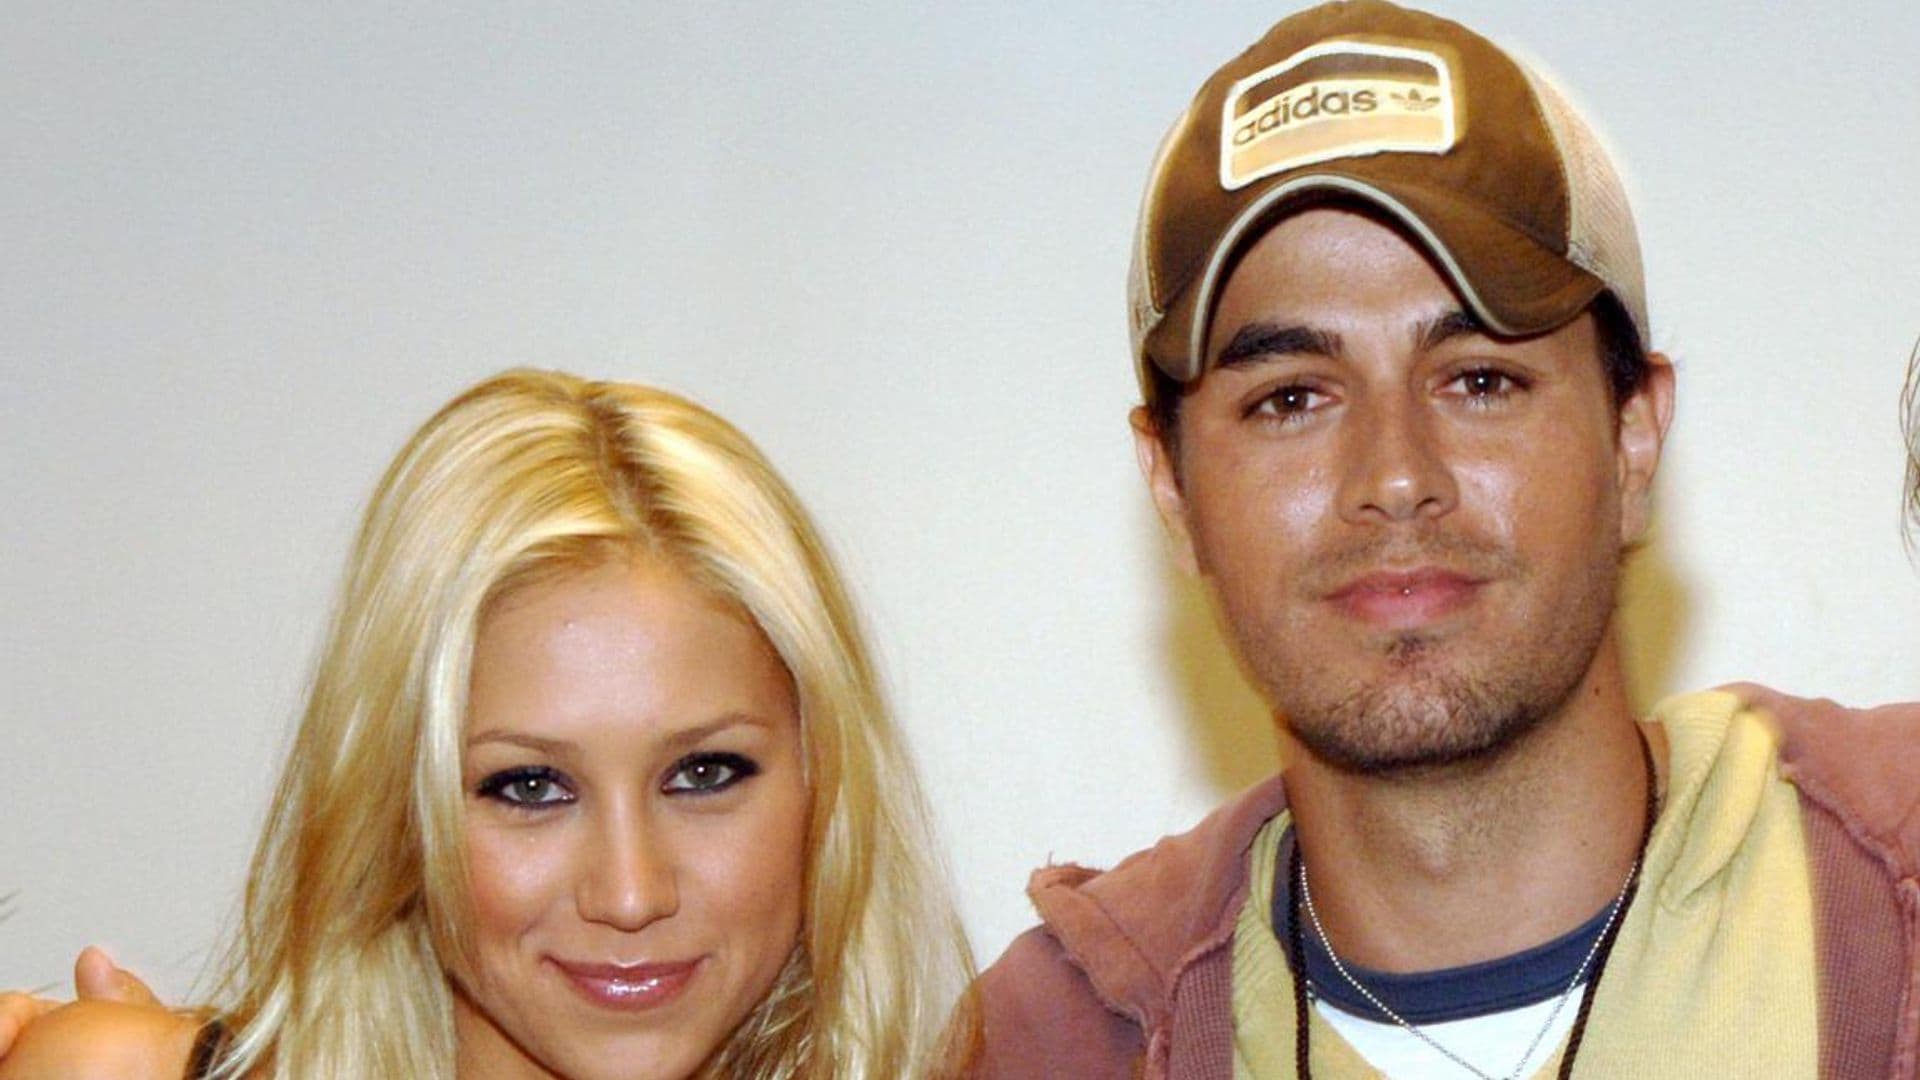 Anna Kournikova and Enrique Iglesias’s daughter might be a tennis pro like her mother someday